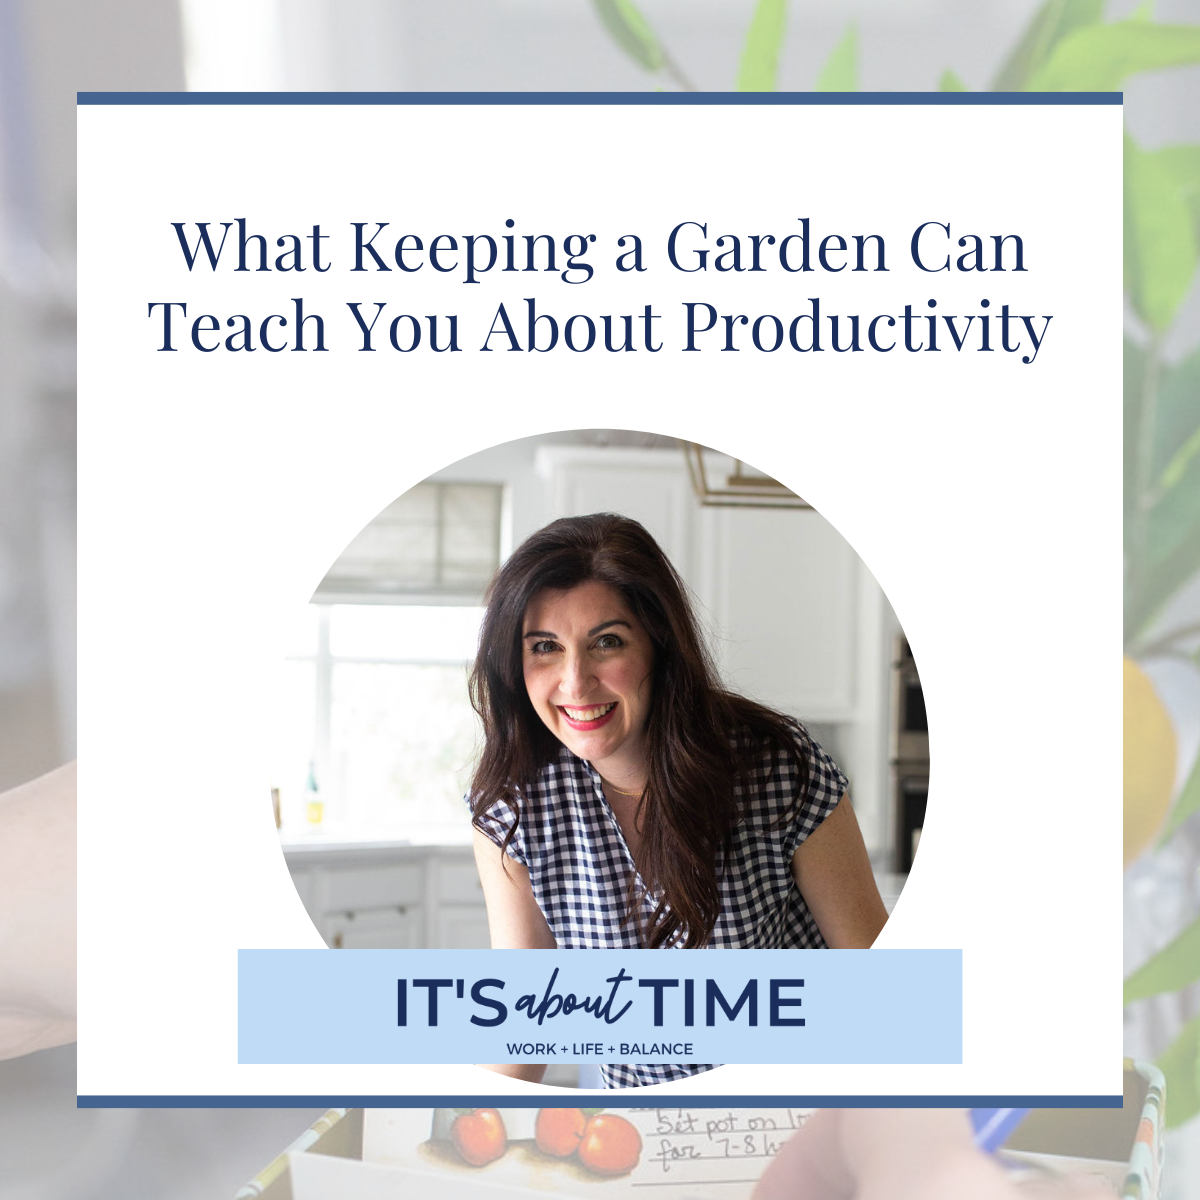 Gardening and Productivity